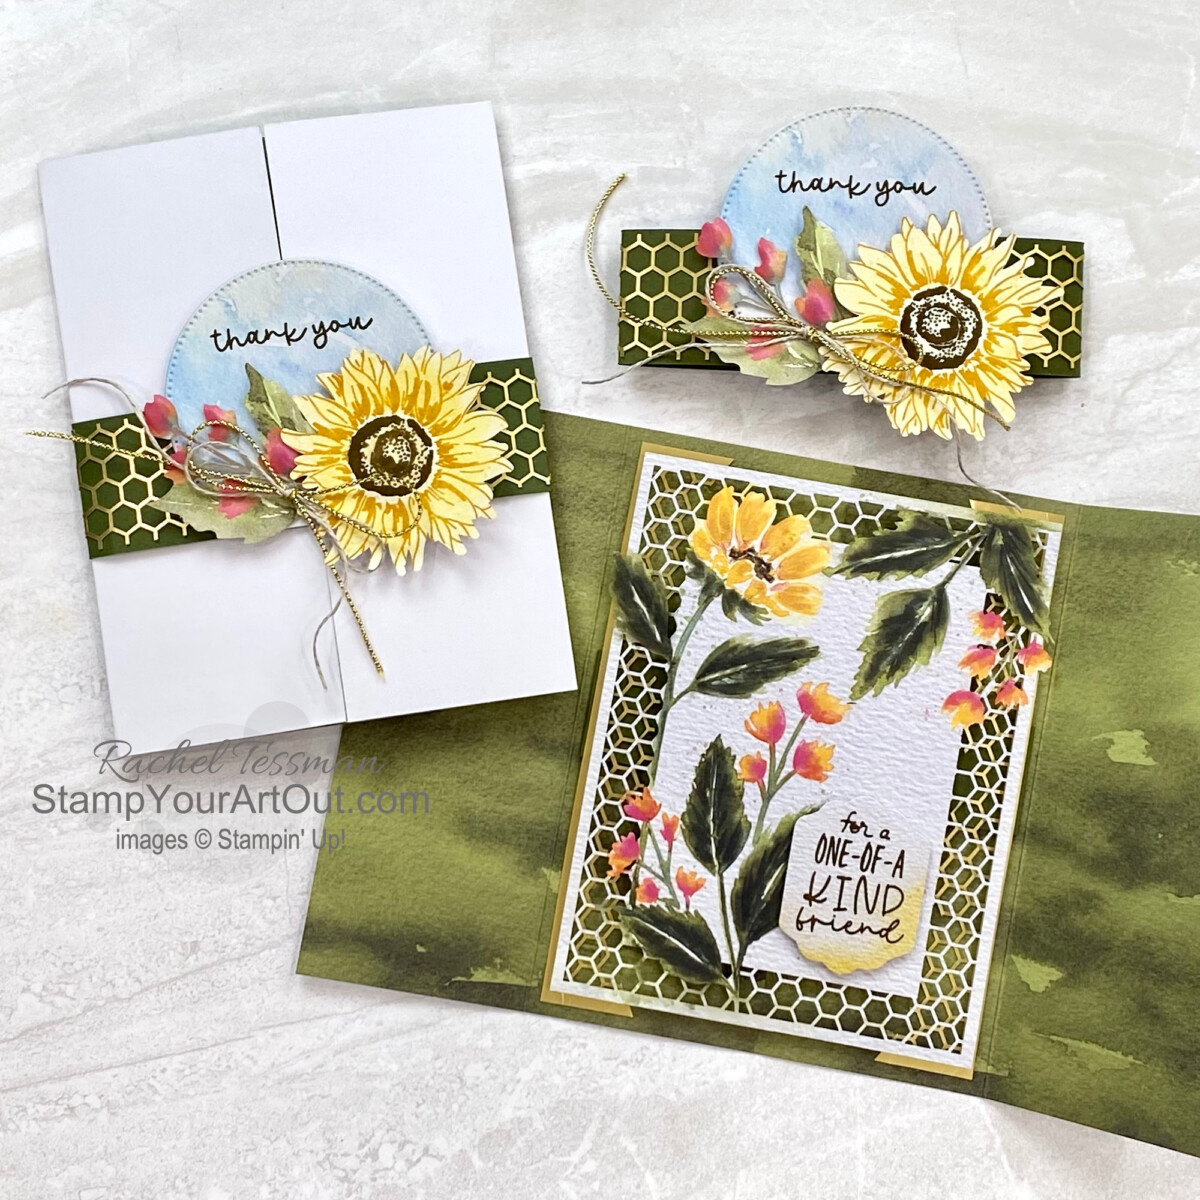 I’m excited to share with you some alternate ideas I came up with using the contents of the August 2022 Sweet Sunflowers Paper Pumpkin Kit: a fun set of tags in a multi-pocket holder and seven alternate cards (including tulle shakers and a pop-out bendy fun fold). Visit my 8/22/22 blog post for photos, a video with directions, measurements and tips, and a complete product list linked to my online store. - Stampin’ Up!® - Stamp Your Art Out! www.stampyourartout.com